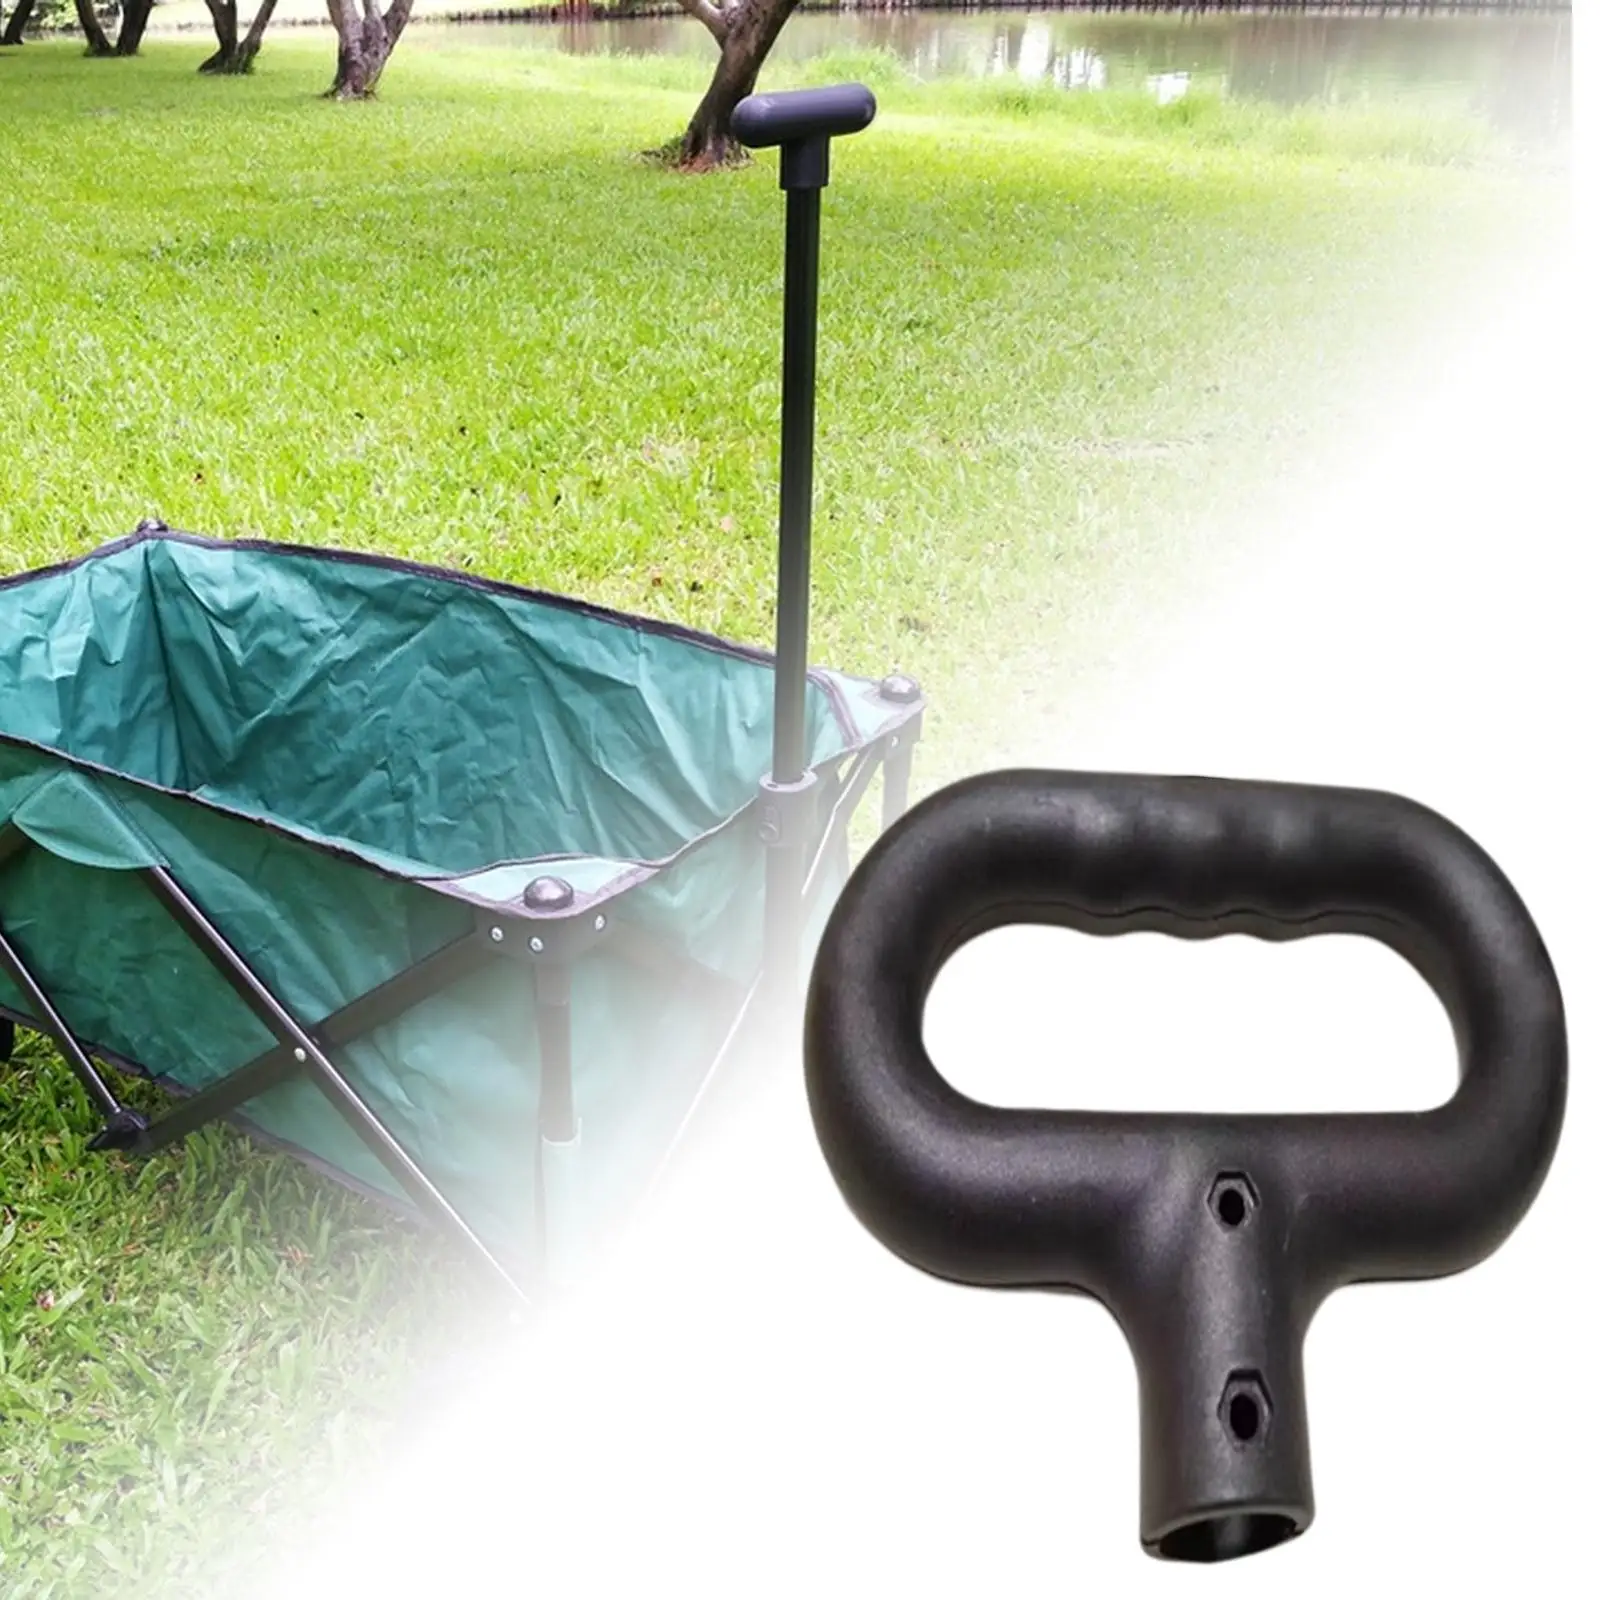 Wagon Cart Push Handle Practical Hand Truck Handle for Garden Shopping Cart Camping Wagon Outdoor Accessories Attachment